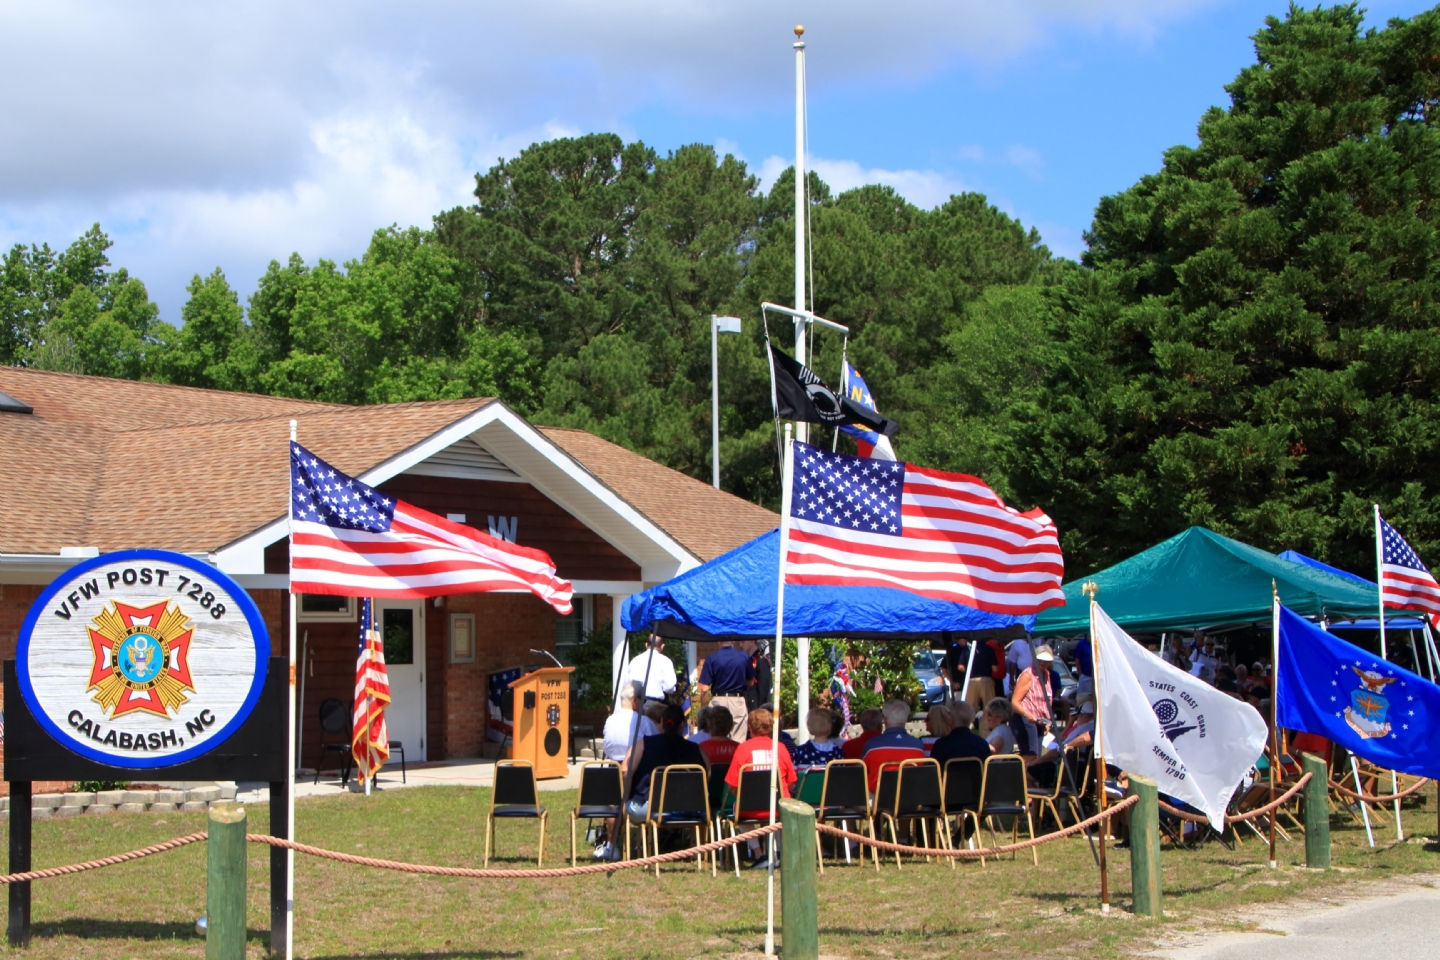 Large Crowds gathered at the Calabash VFW Post 7288 for the annual Memorial Day Ceremony.